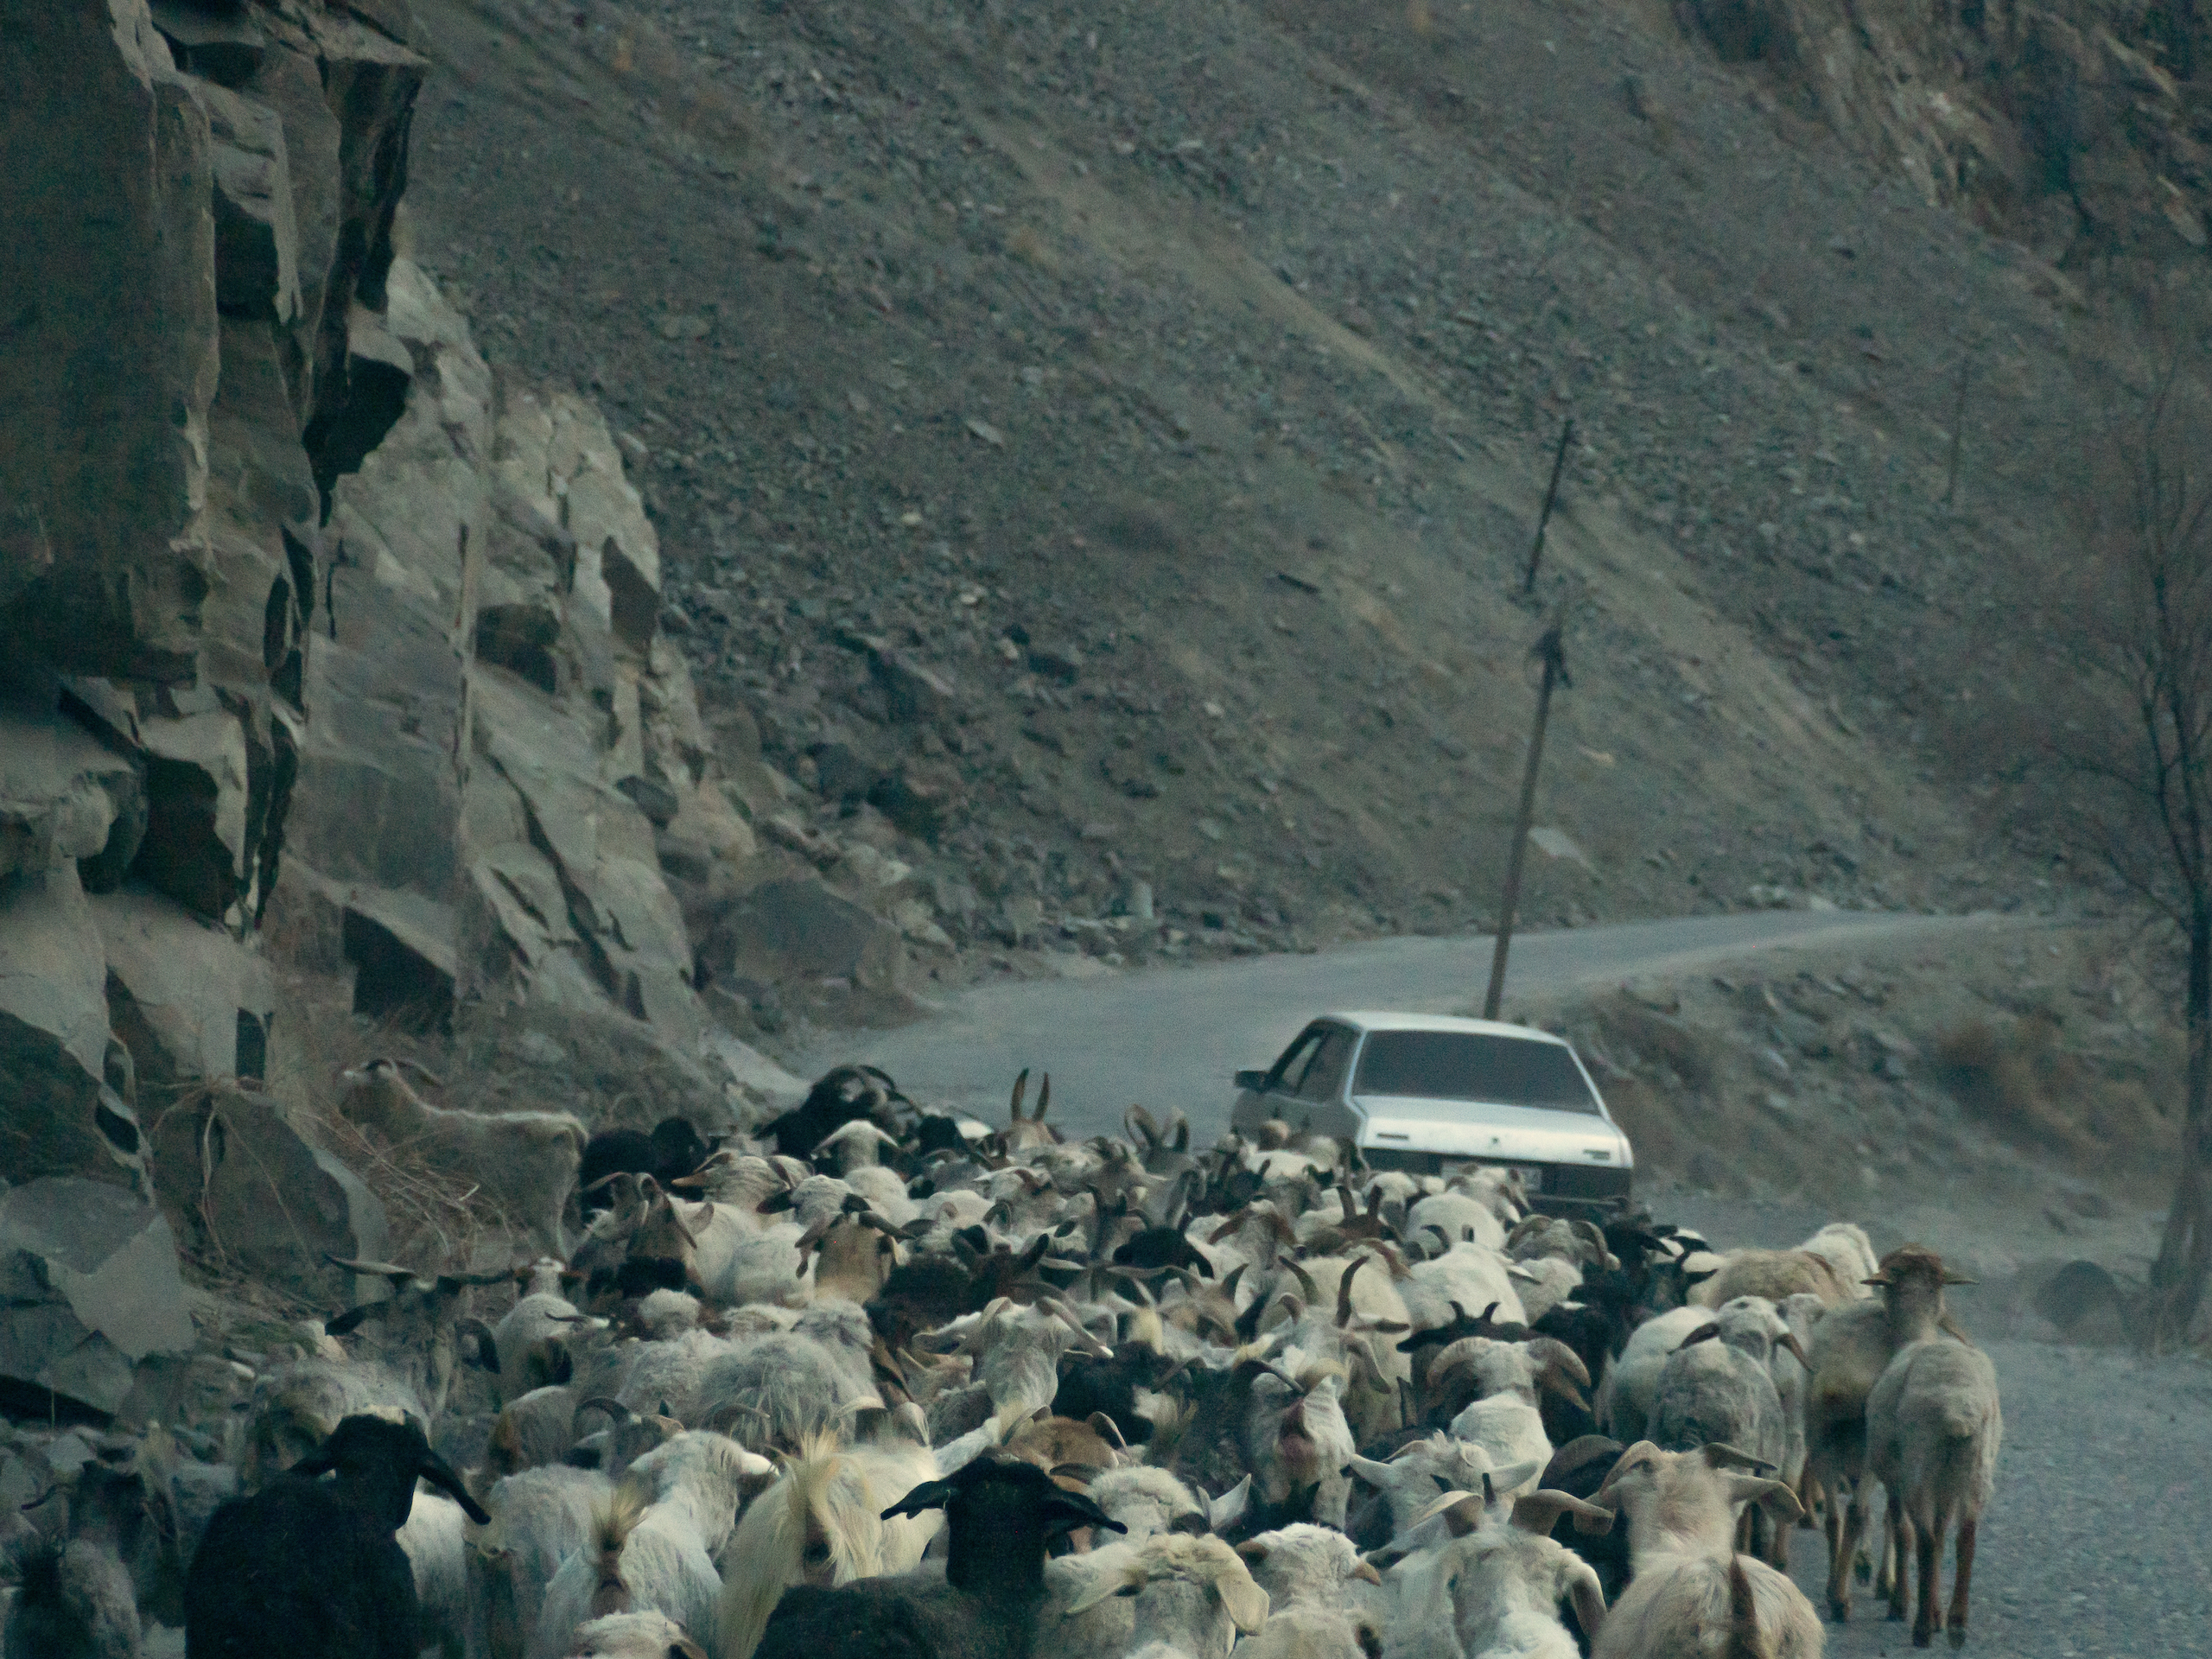 Goats being herded along the Pamir Highway in Vanj district i